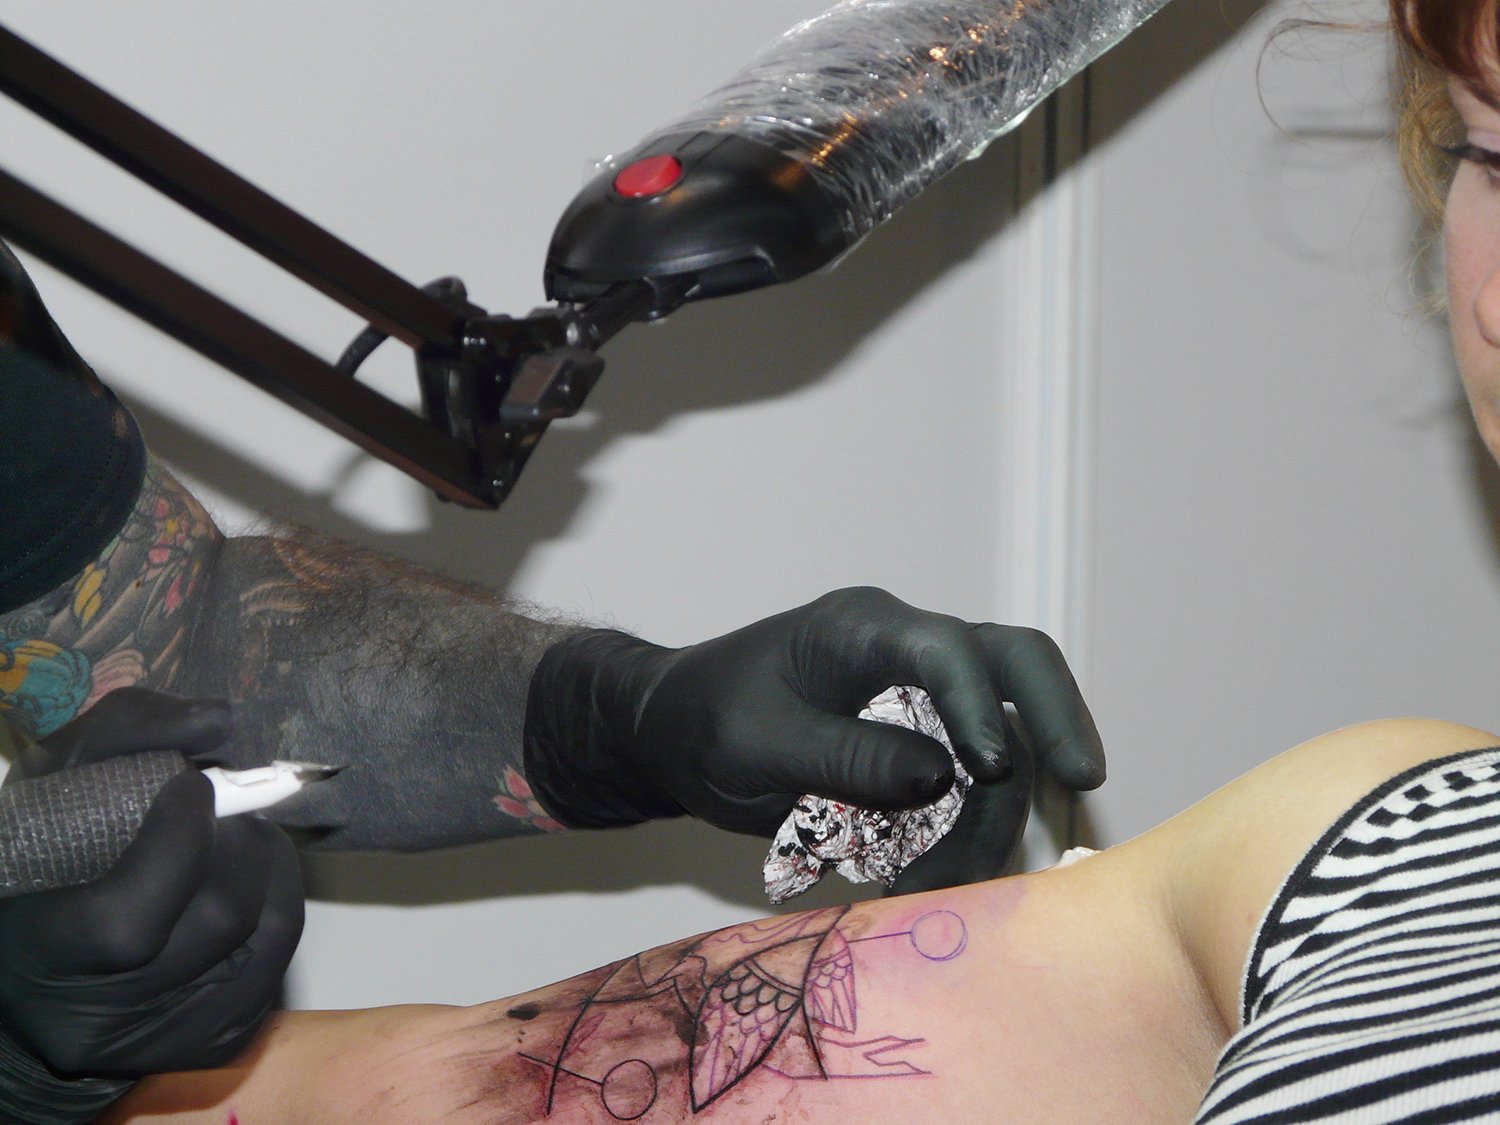 noon tattooing client arm, abstract tattoo, tattoo convention berlin